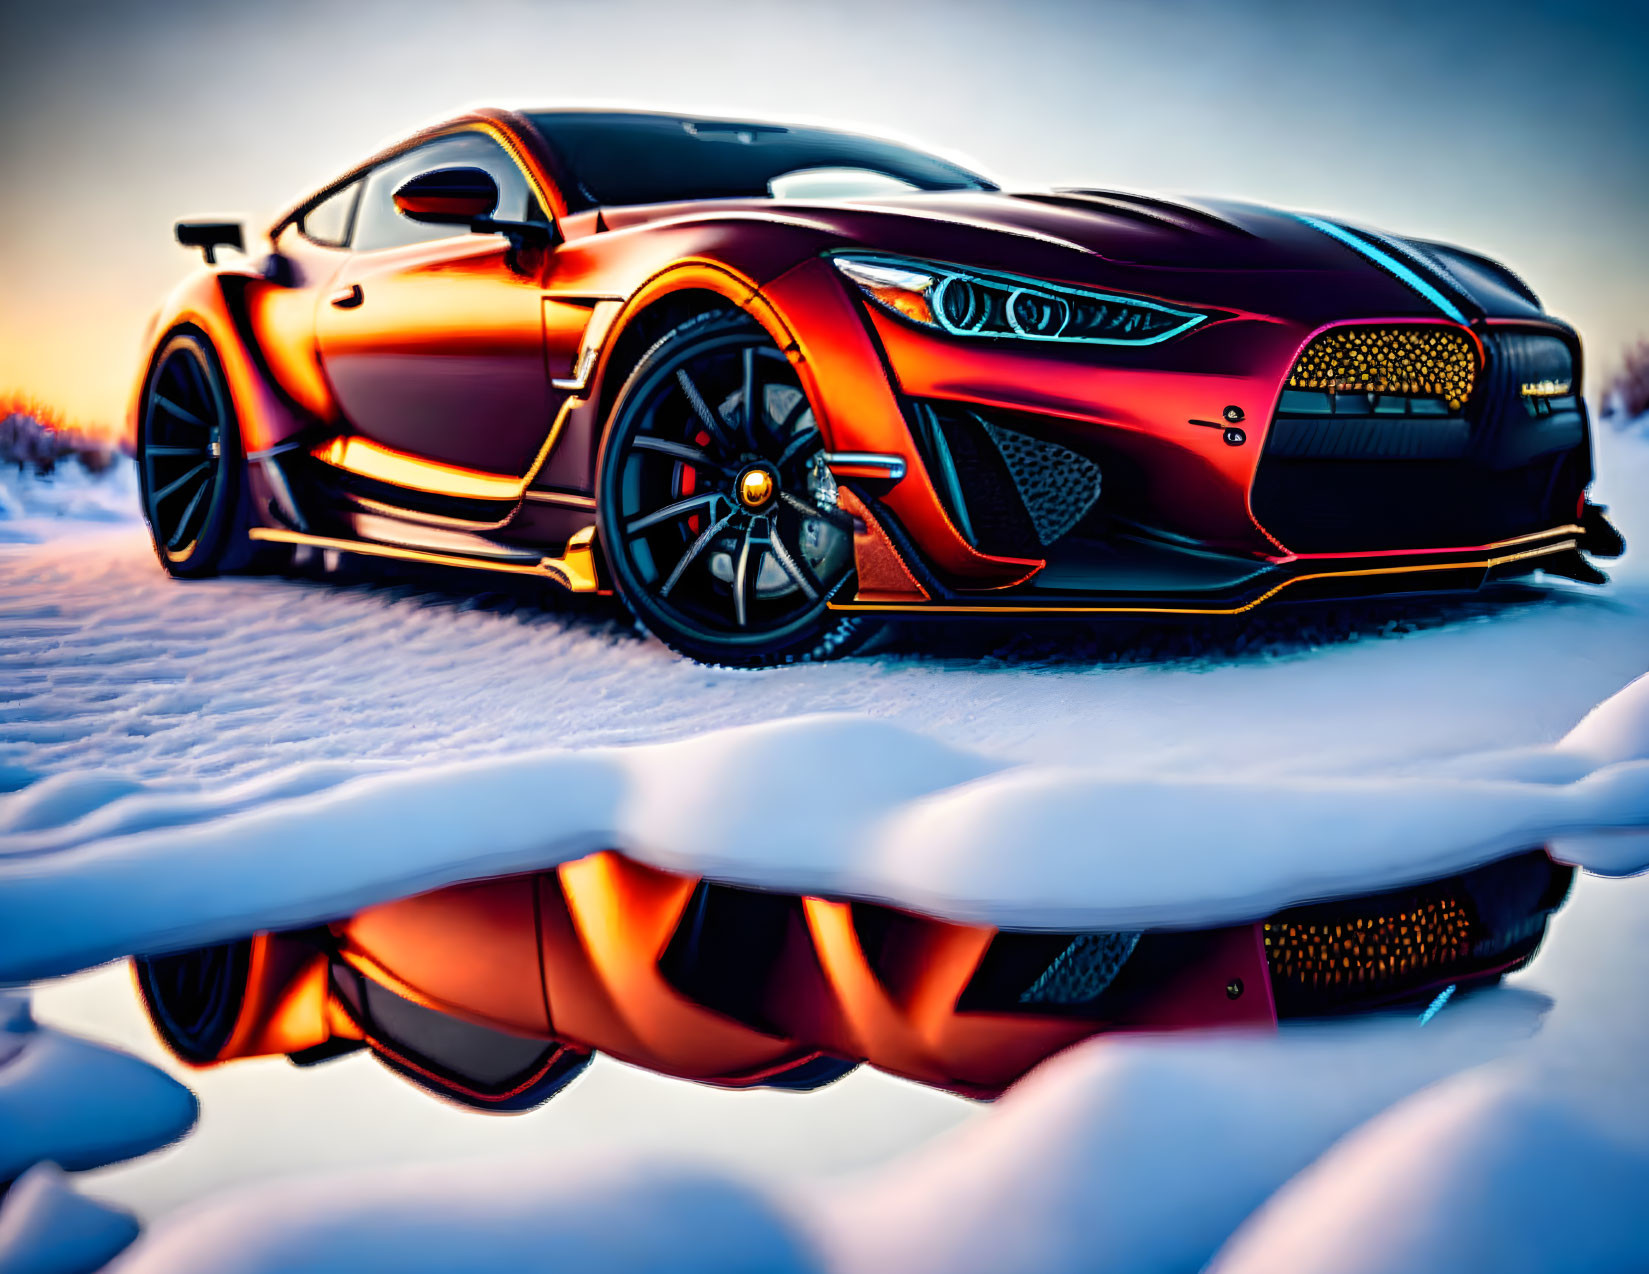 Red and Black Sports Car on Snowy Surface at Twilight